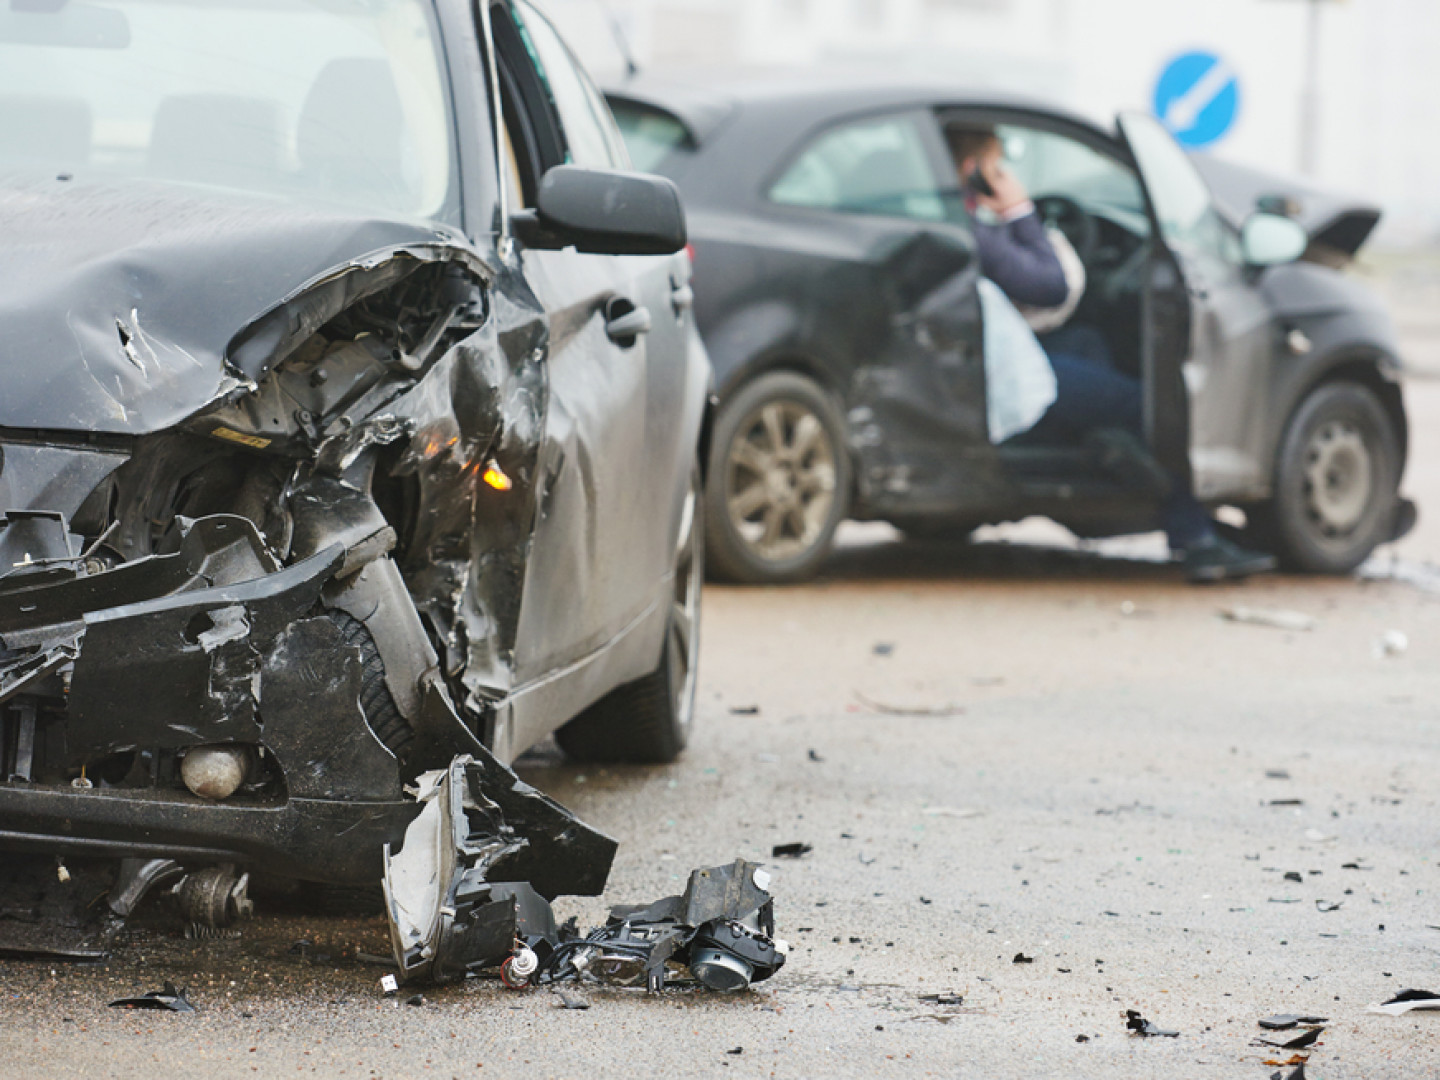 Have you been injured in a vehicle accident by an impaired driver?